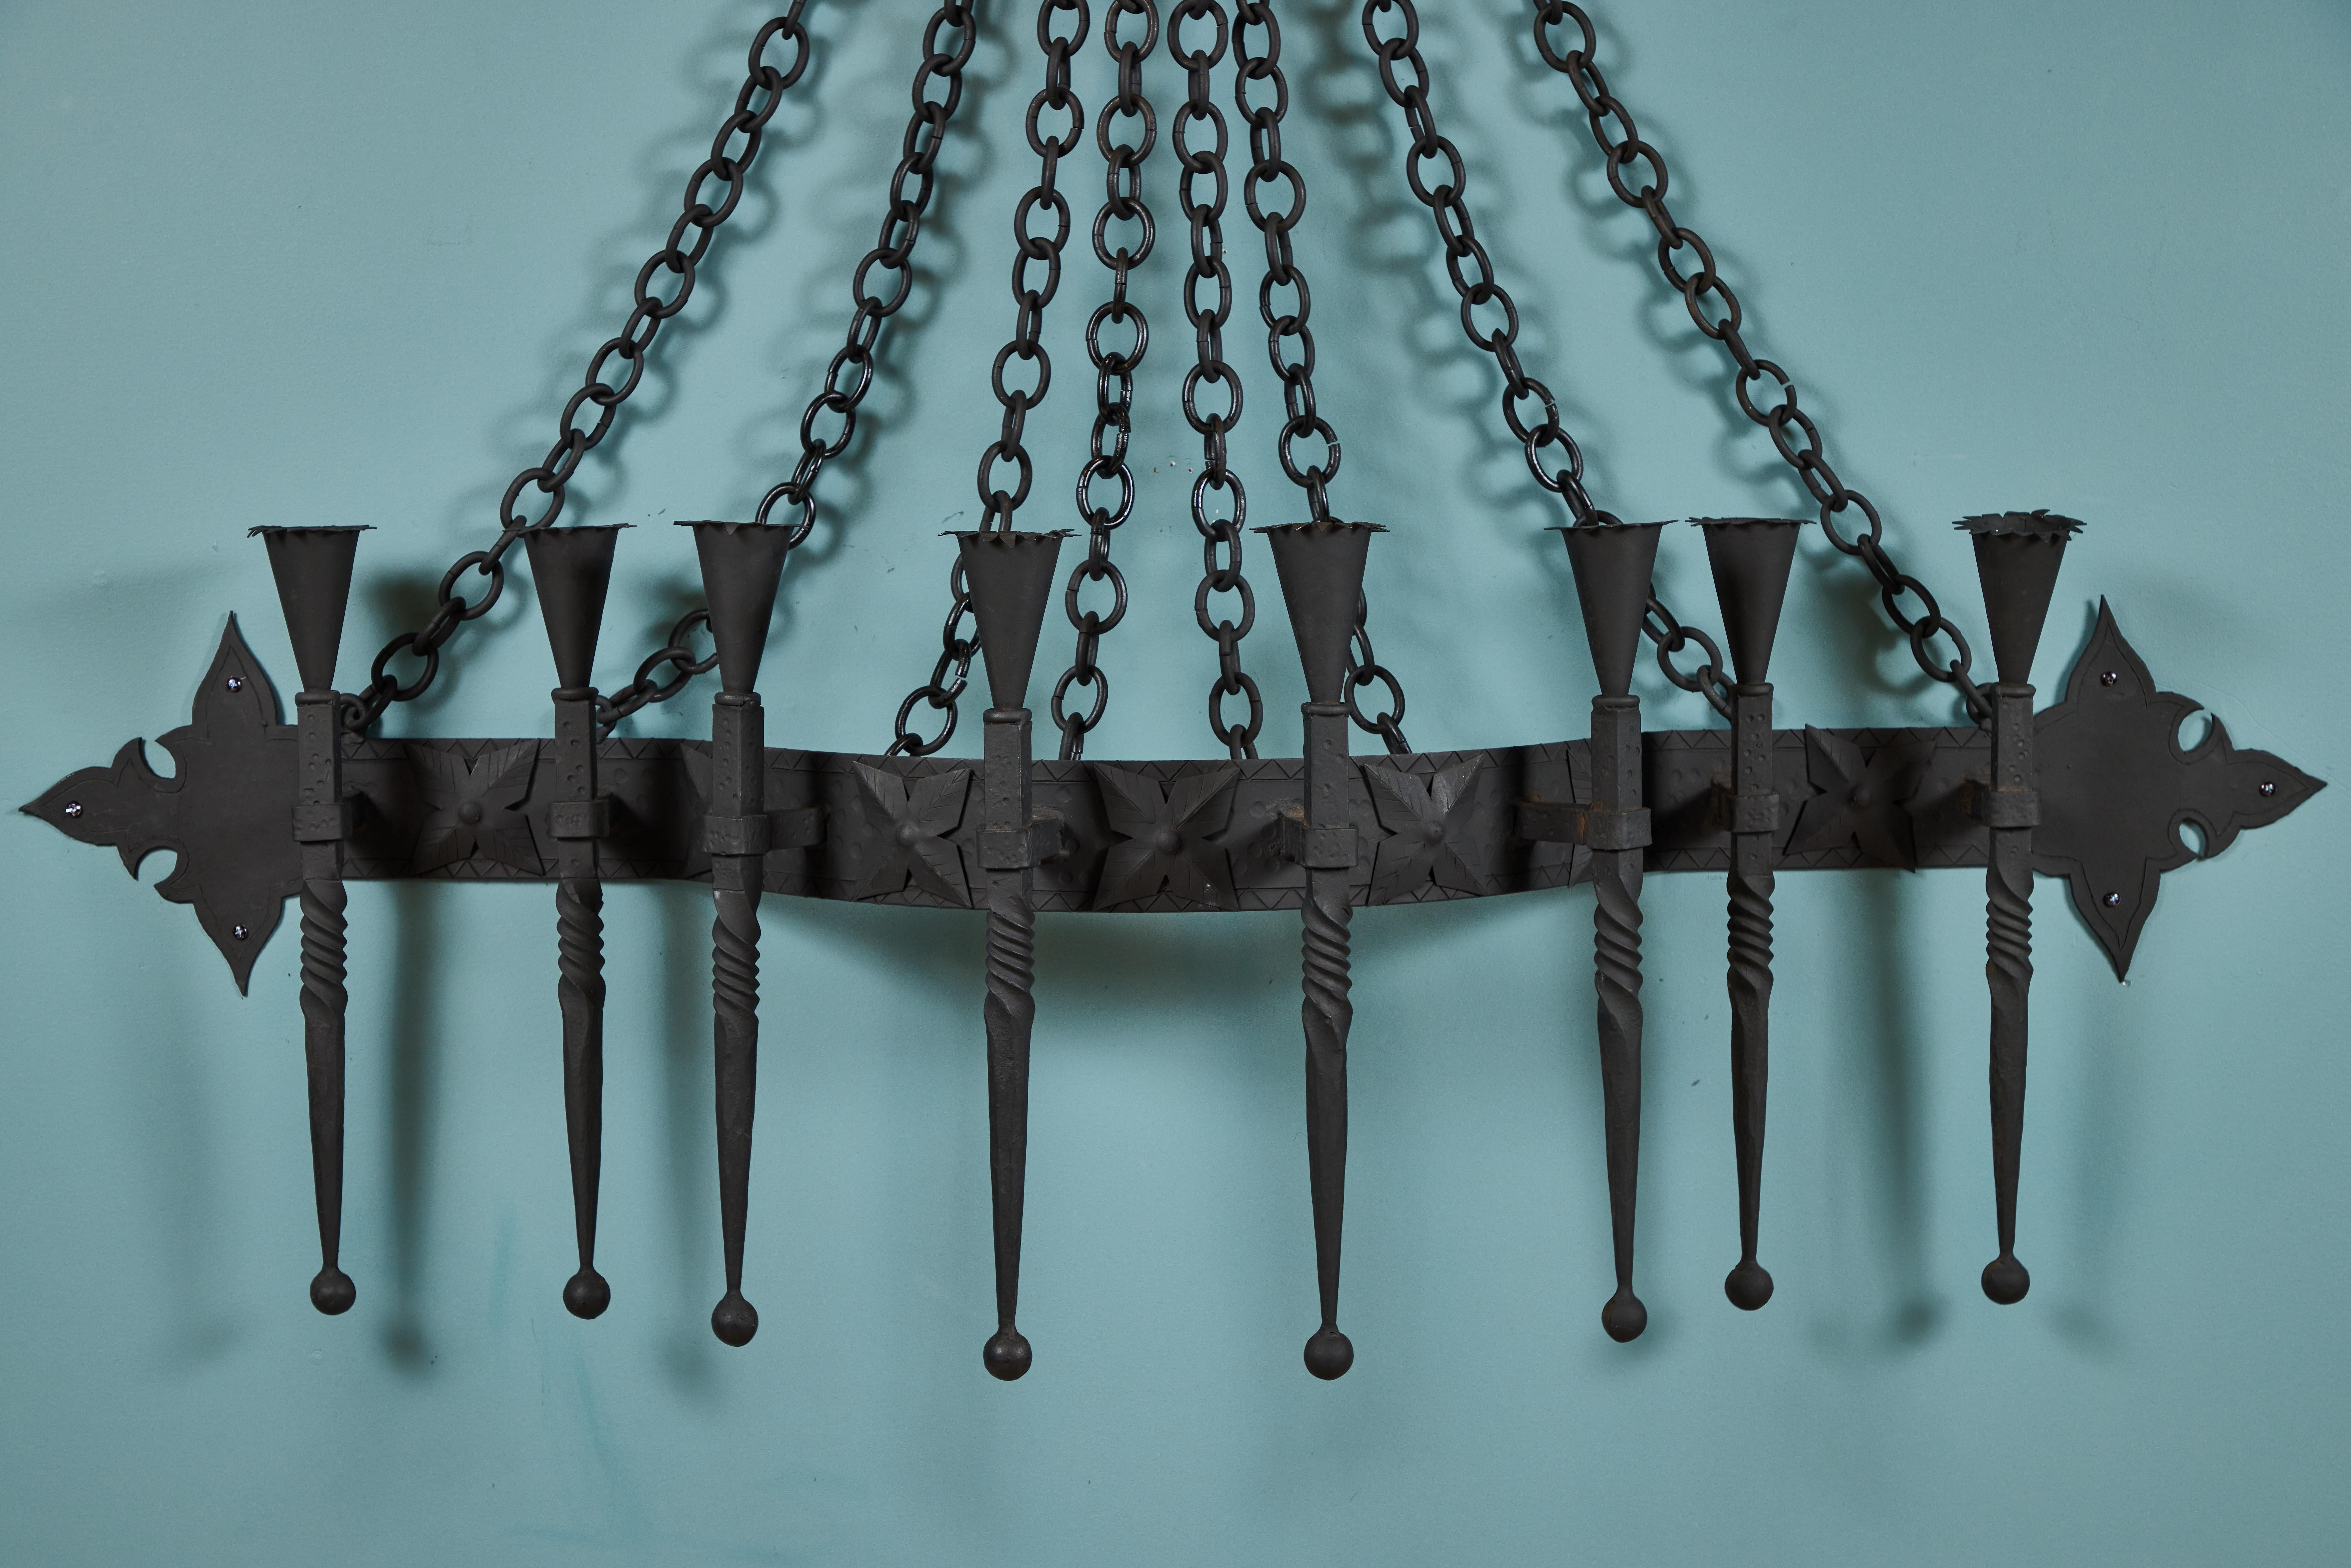 This large vintage wall mounted metal candelabra is made out of iron, the top plaque holds 8 chains that connect to a curved decorative band with 8 candle holders. (New black painted finish)

It is quite handsome and would be spectacular over a